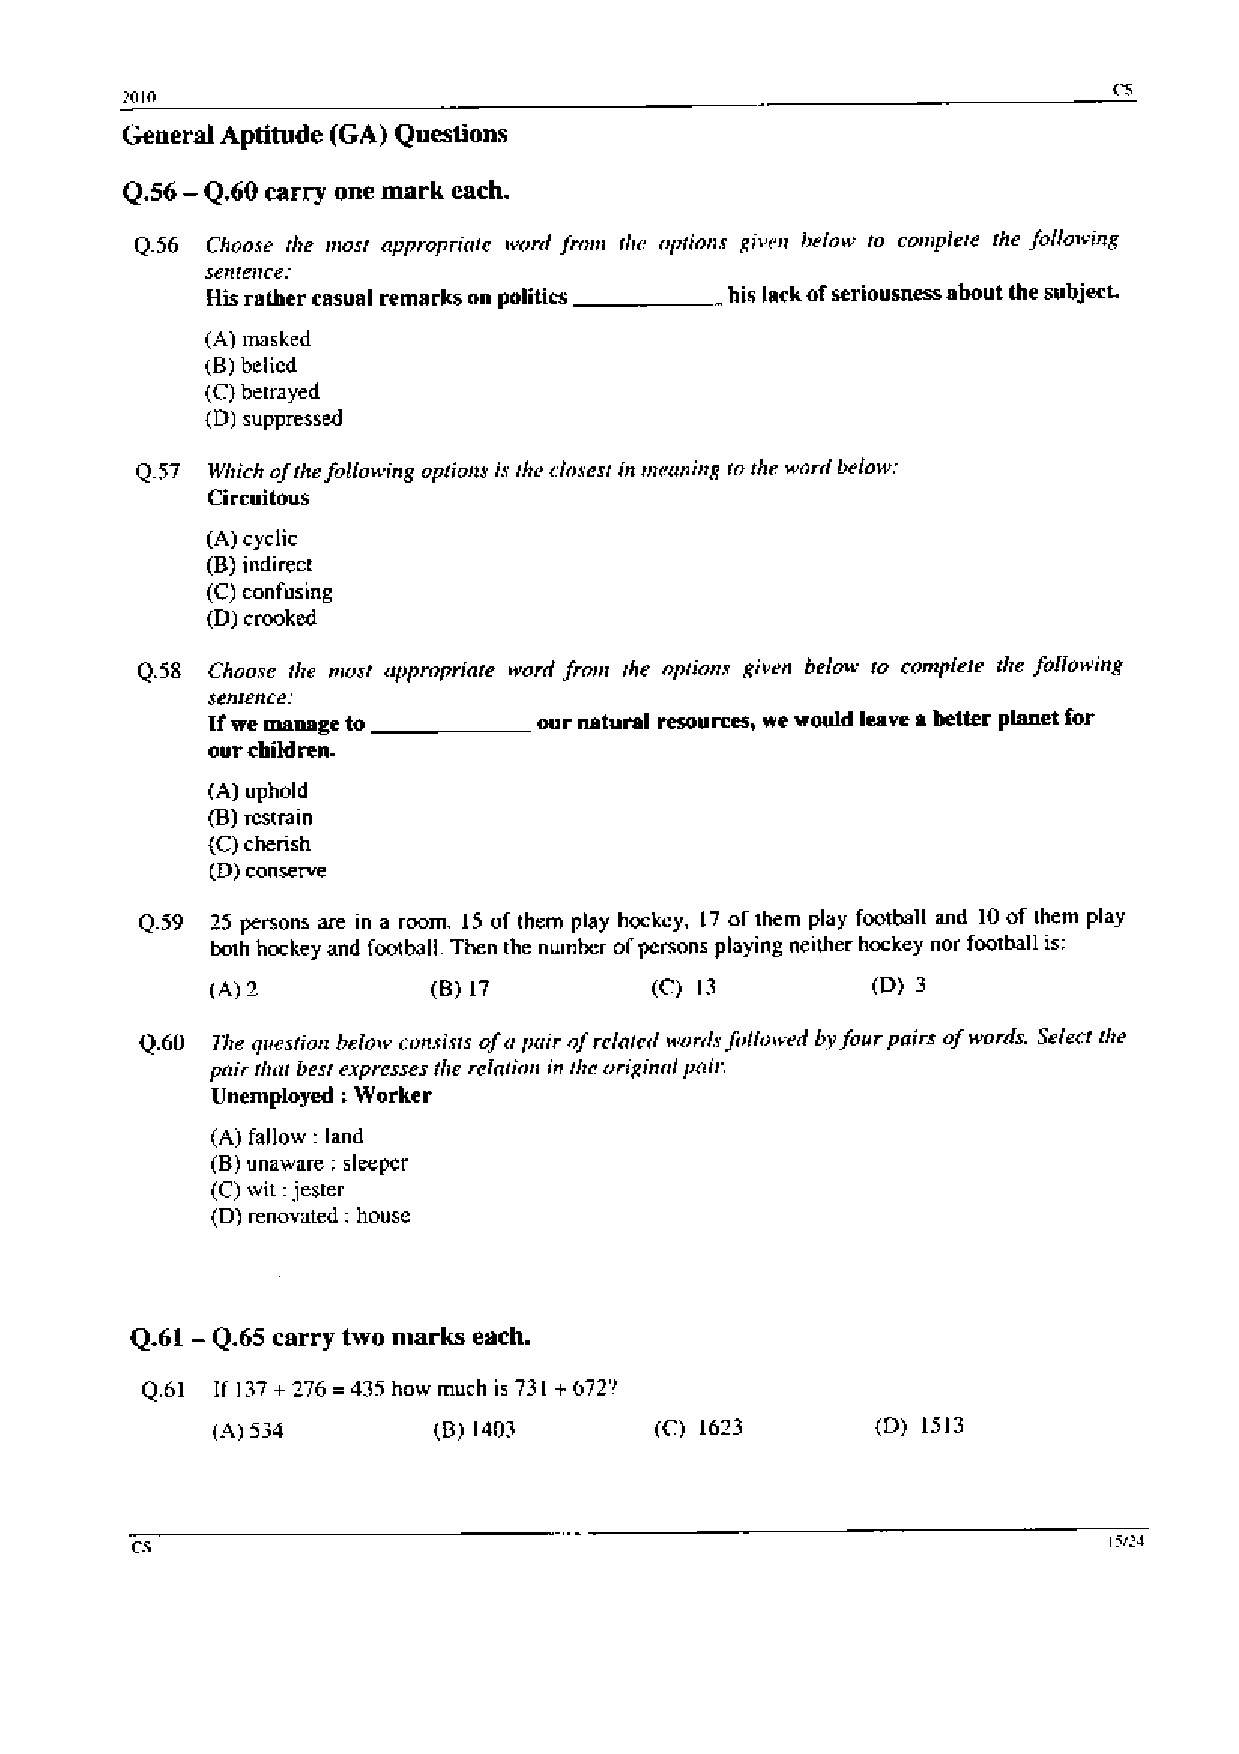 GATE Exam Question Paper 2010 Computer Science and Information Technology 15